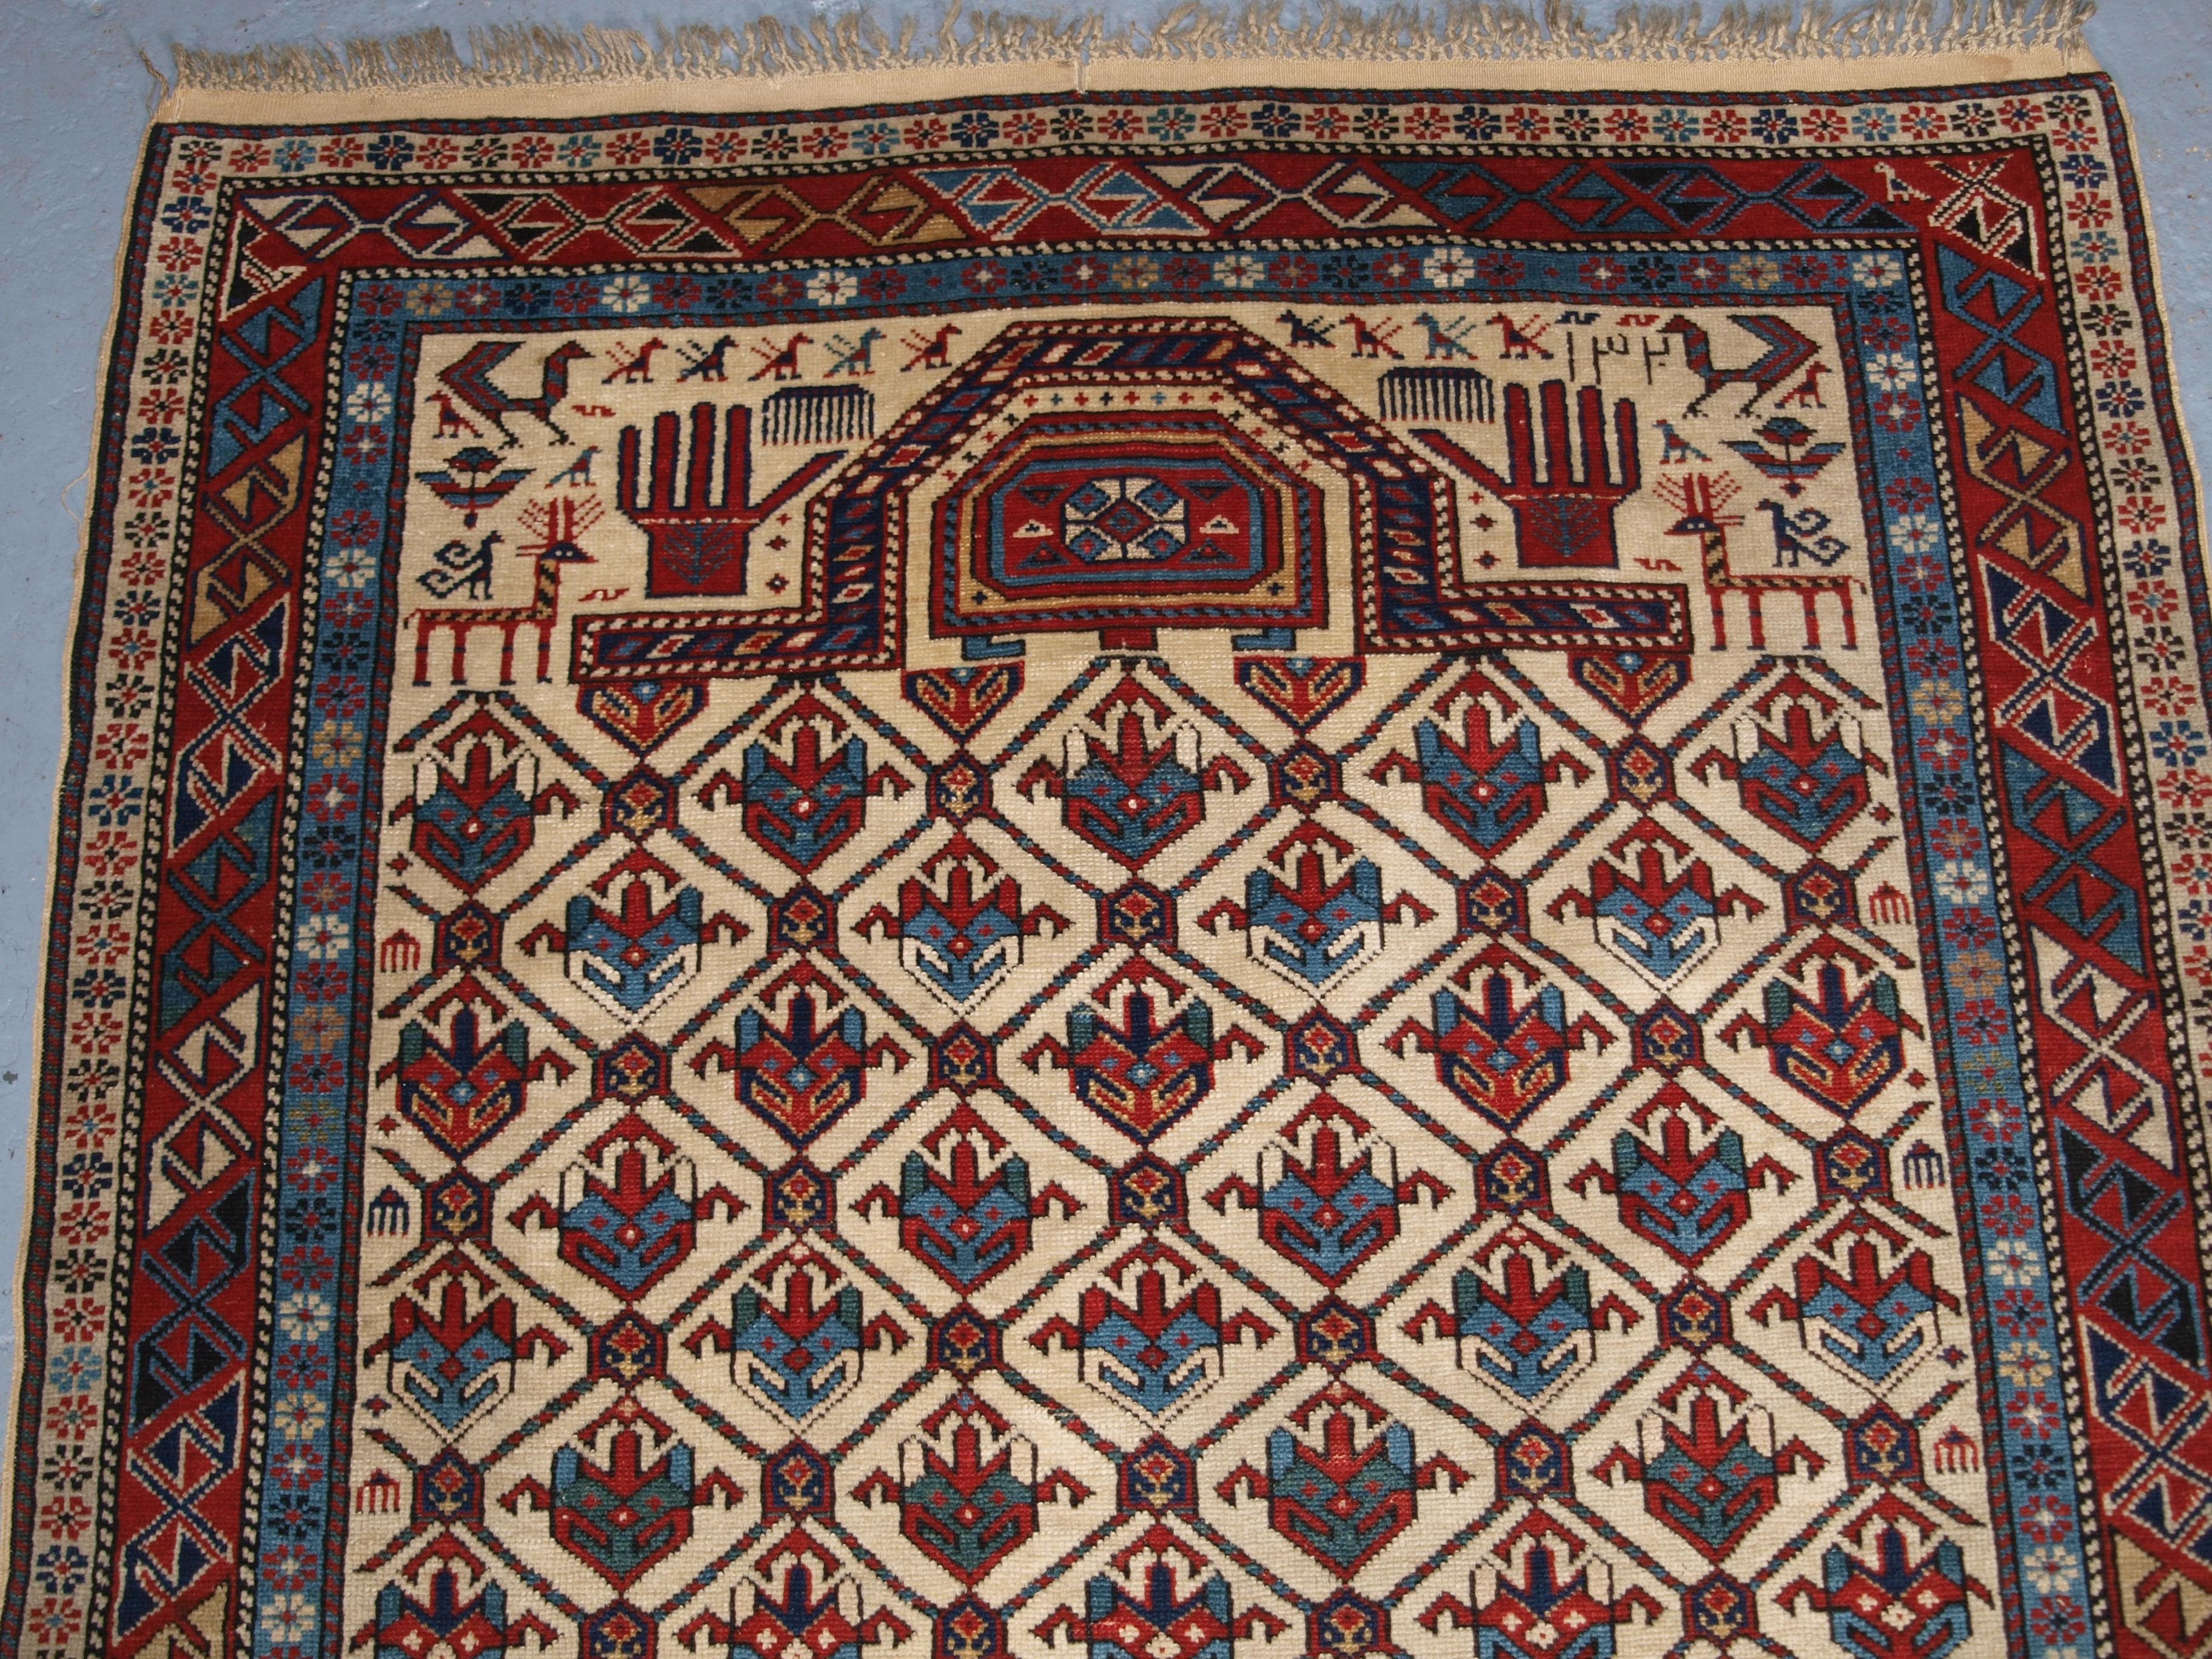 Antique Caucasian Shirvan prayer rug with lattice design on an ivory ground. Dated 1320 (1902 in the western calendar). This is a superb example of this well known group of prayer rugs, this rug has excellent colour and is very well drawn. This very